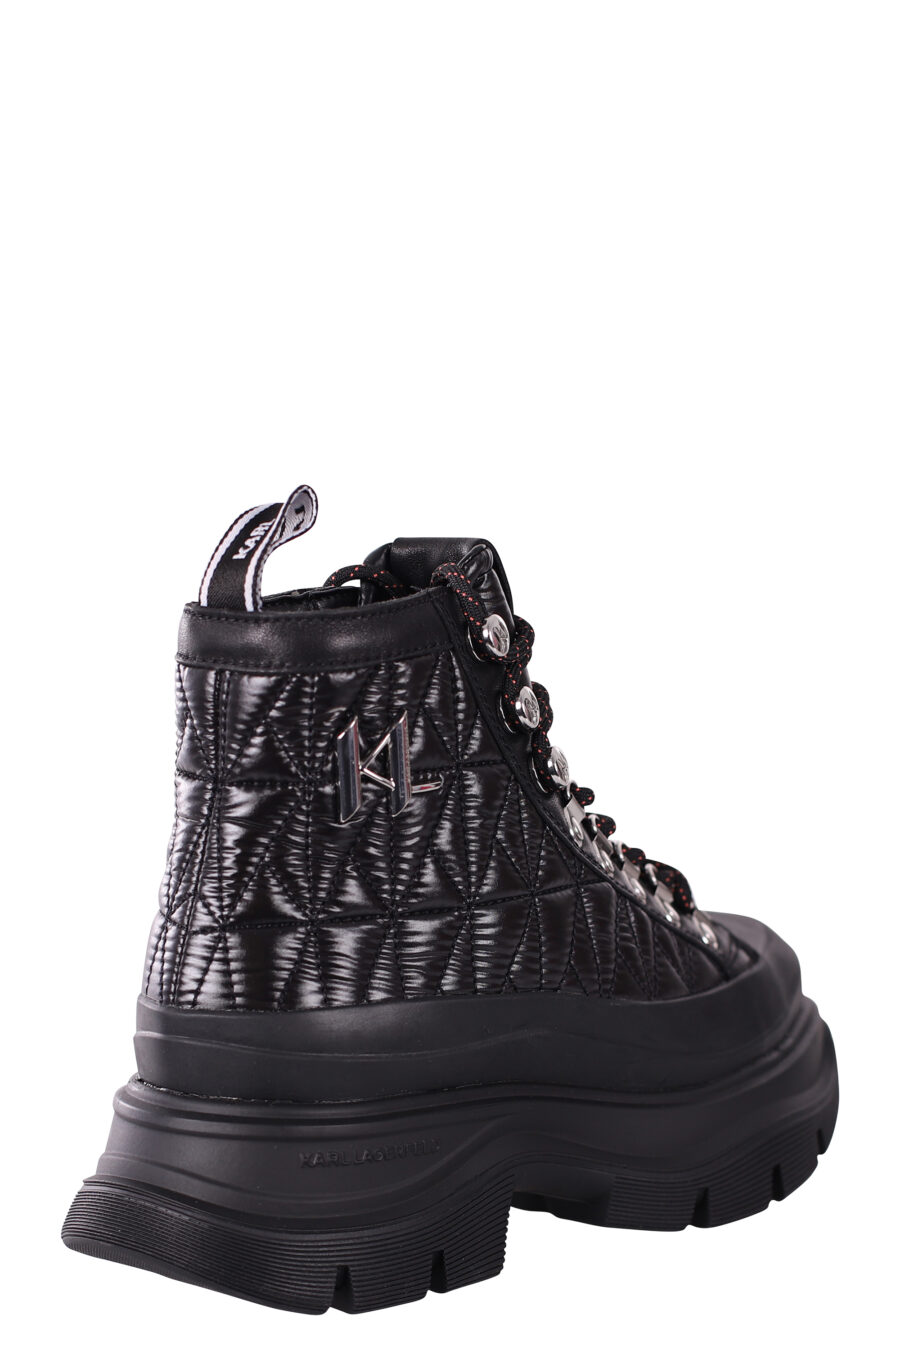 Black ankle boots with silver monogram logo and laces - IMG 5804